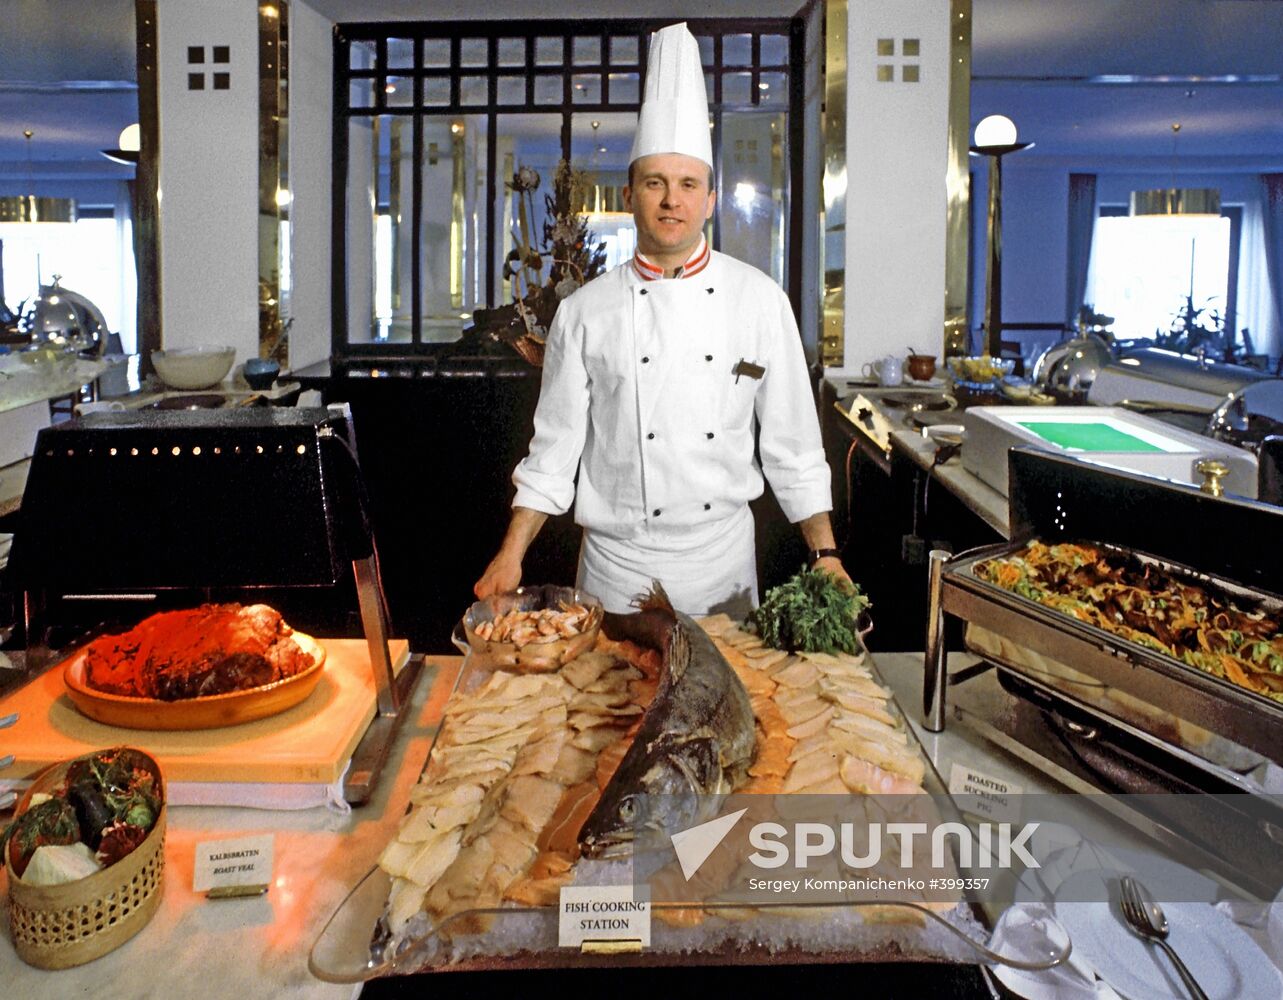 A cook in Imperial restaurant, St Petersburg